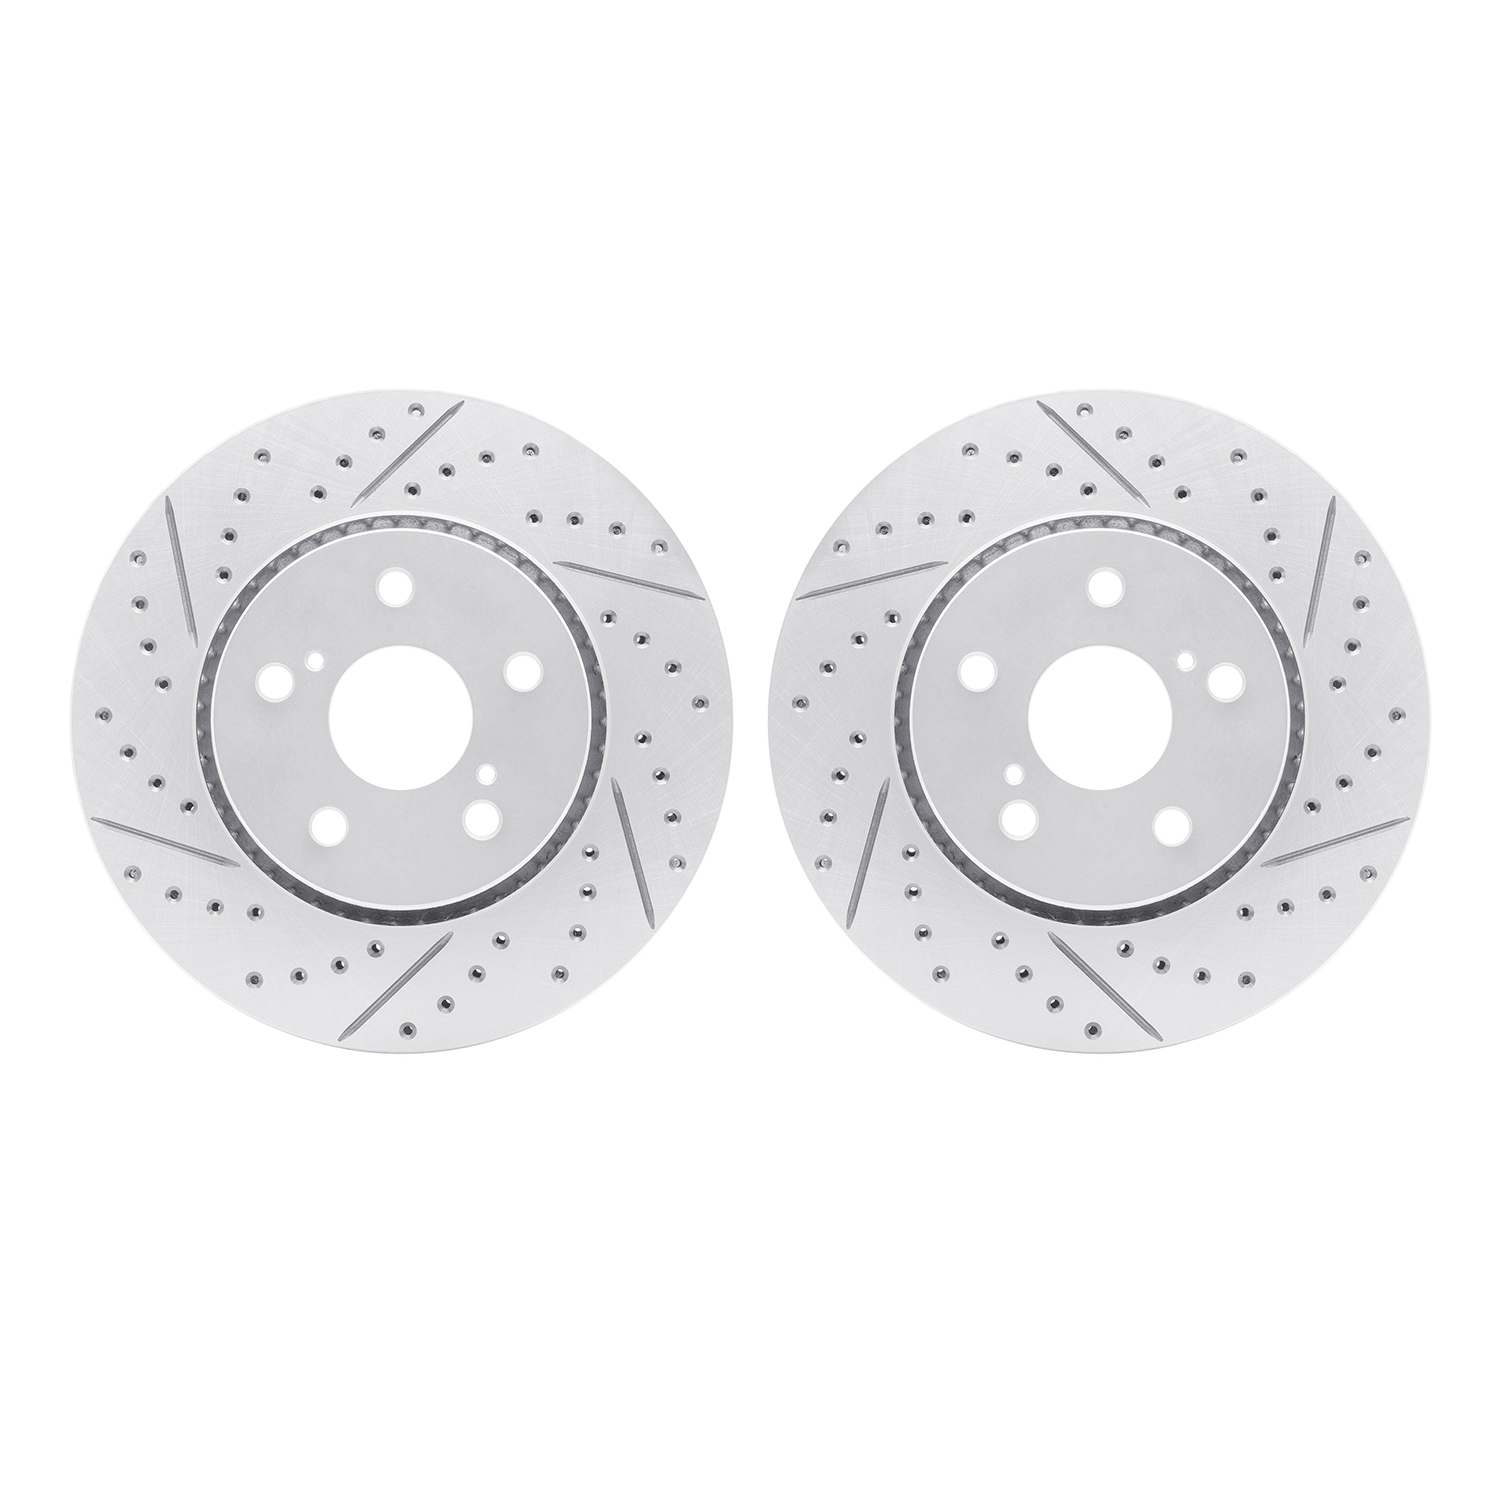 2002-76023 Geoperformance Drilled/Slotted Brake Rotors, Fits Select Lexus/Toyota/Scion, Position: Front